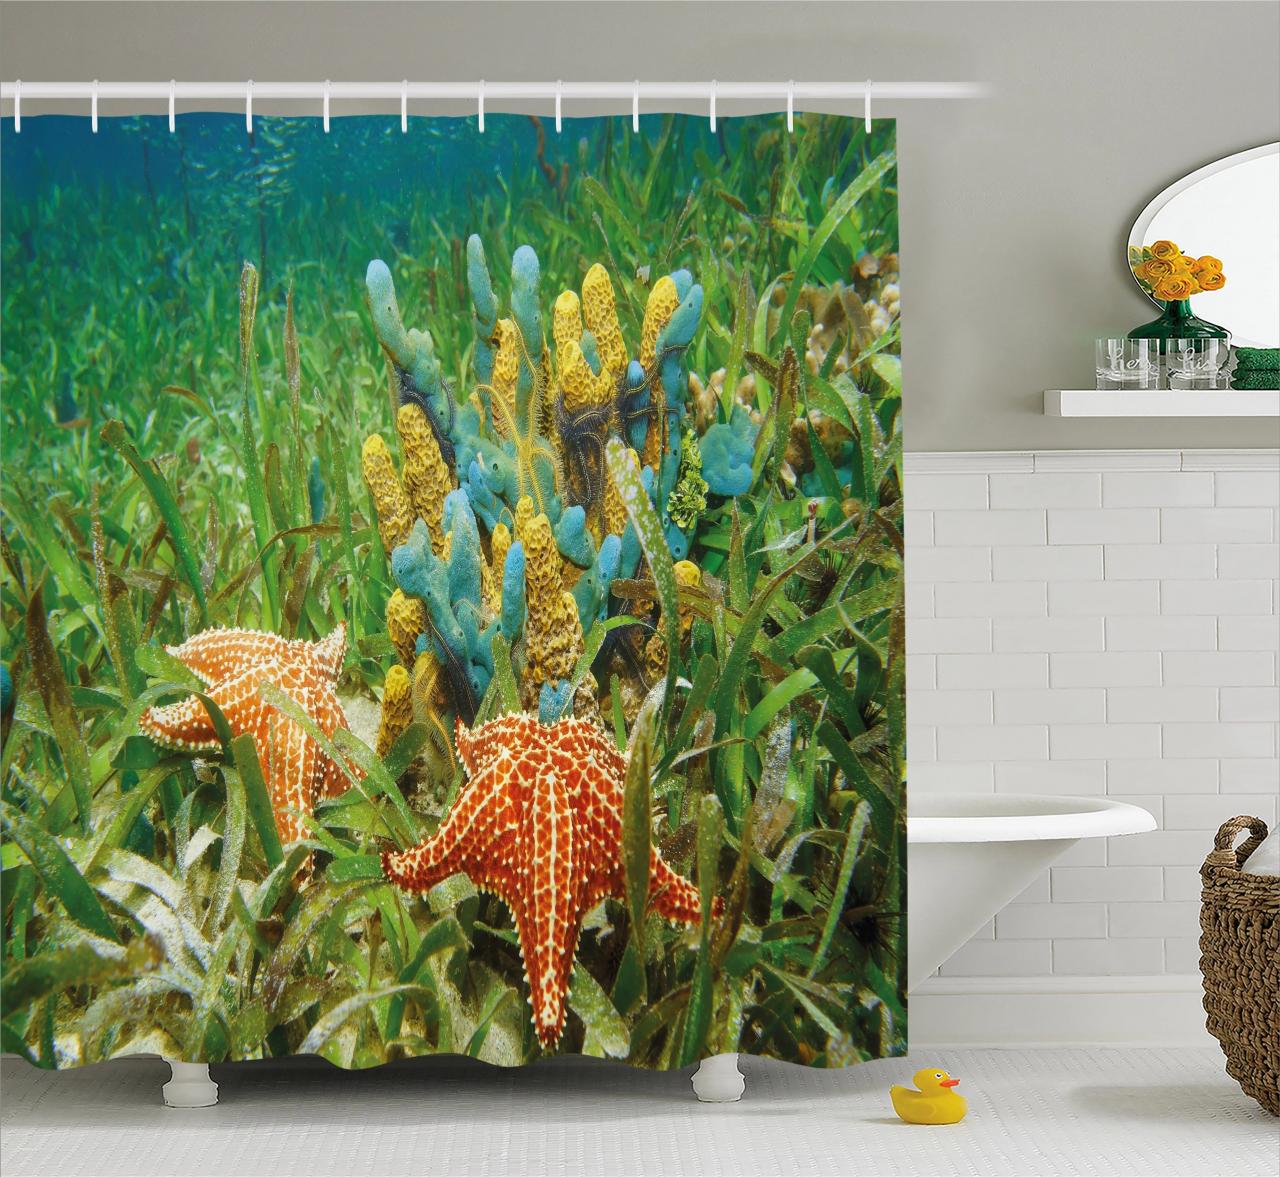 Starfish Decor Shower Curtain, Underwater Life with Colorful Sponges